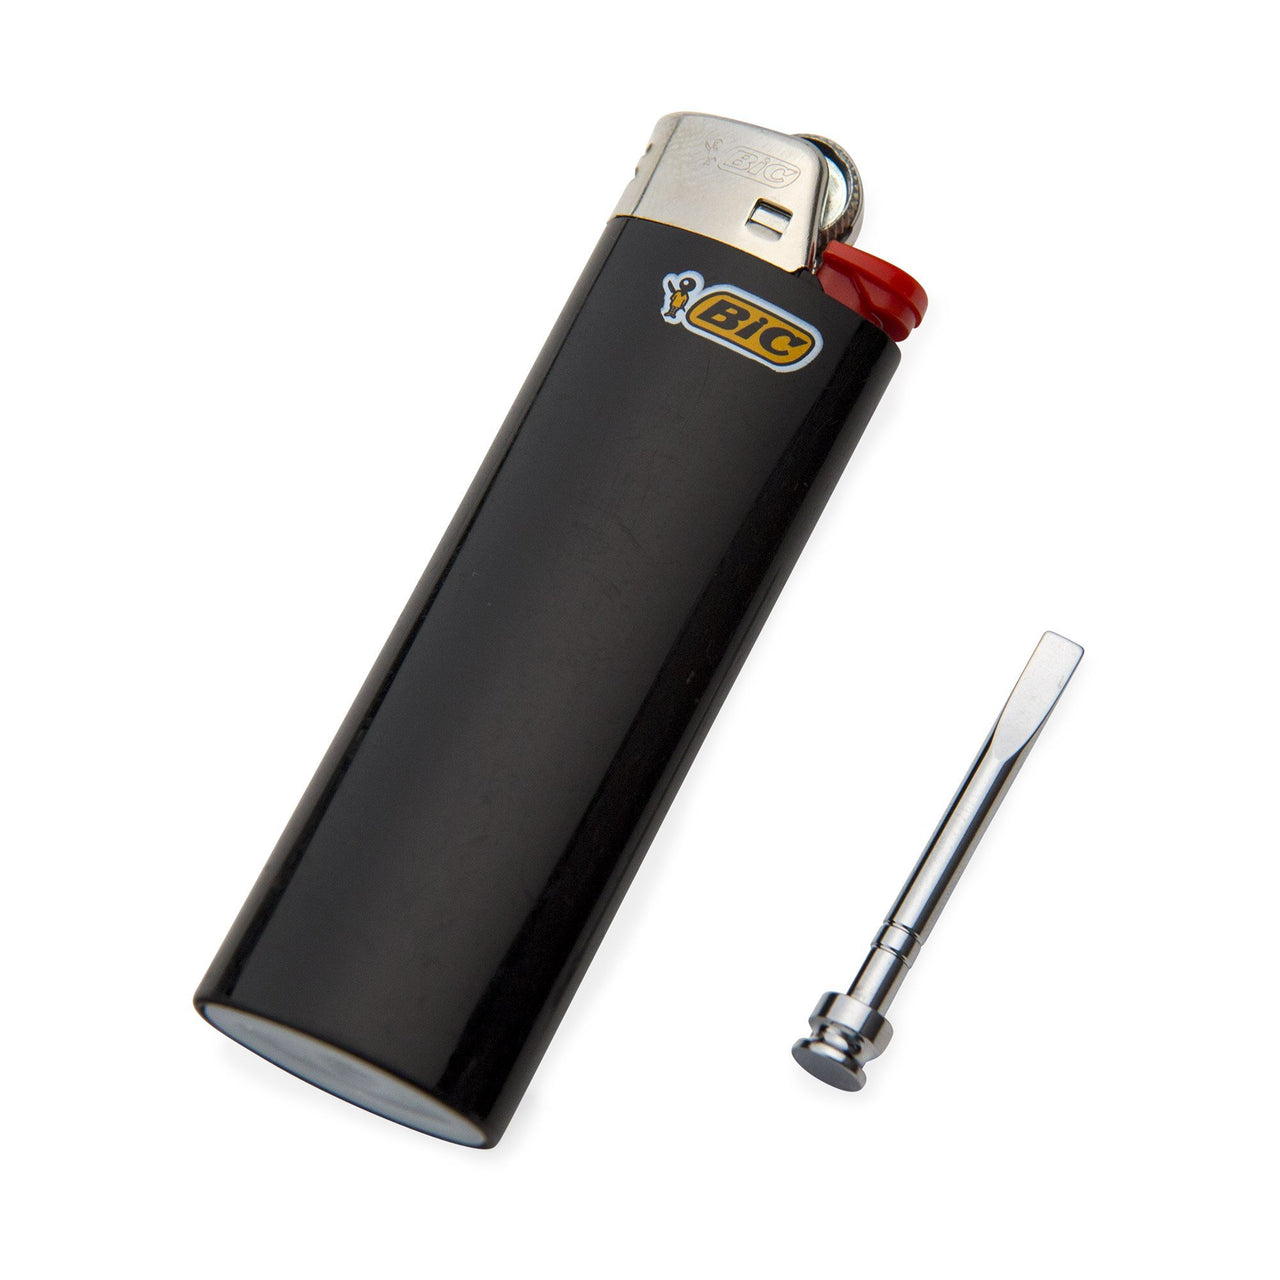 LINX Gaia Magnetic Tool | Vaporizer Parts & Accessories | 420 Science